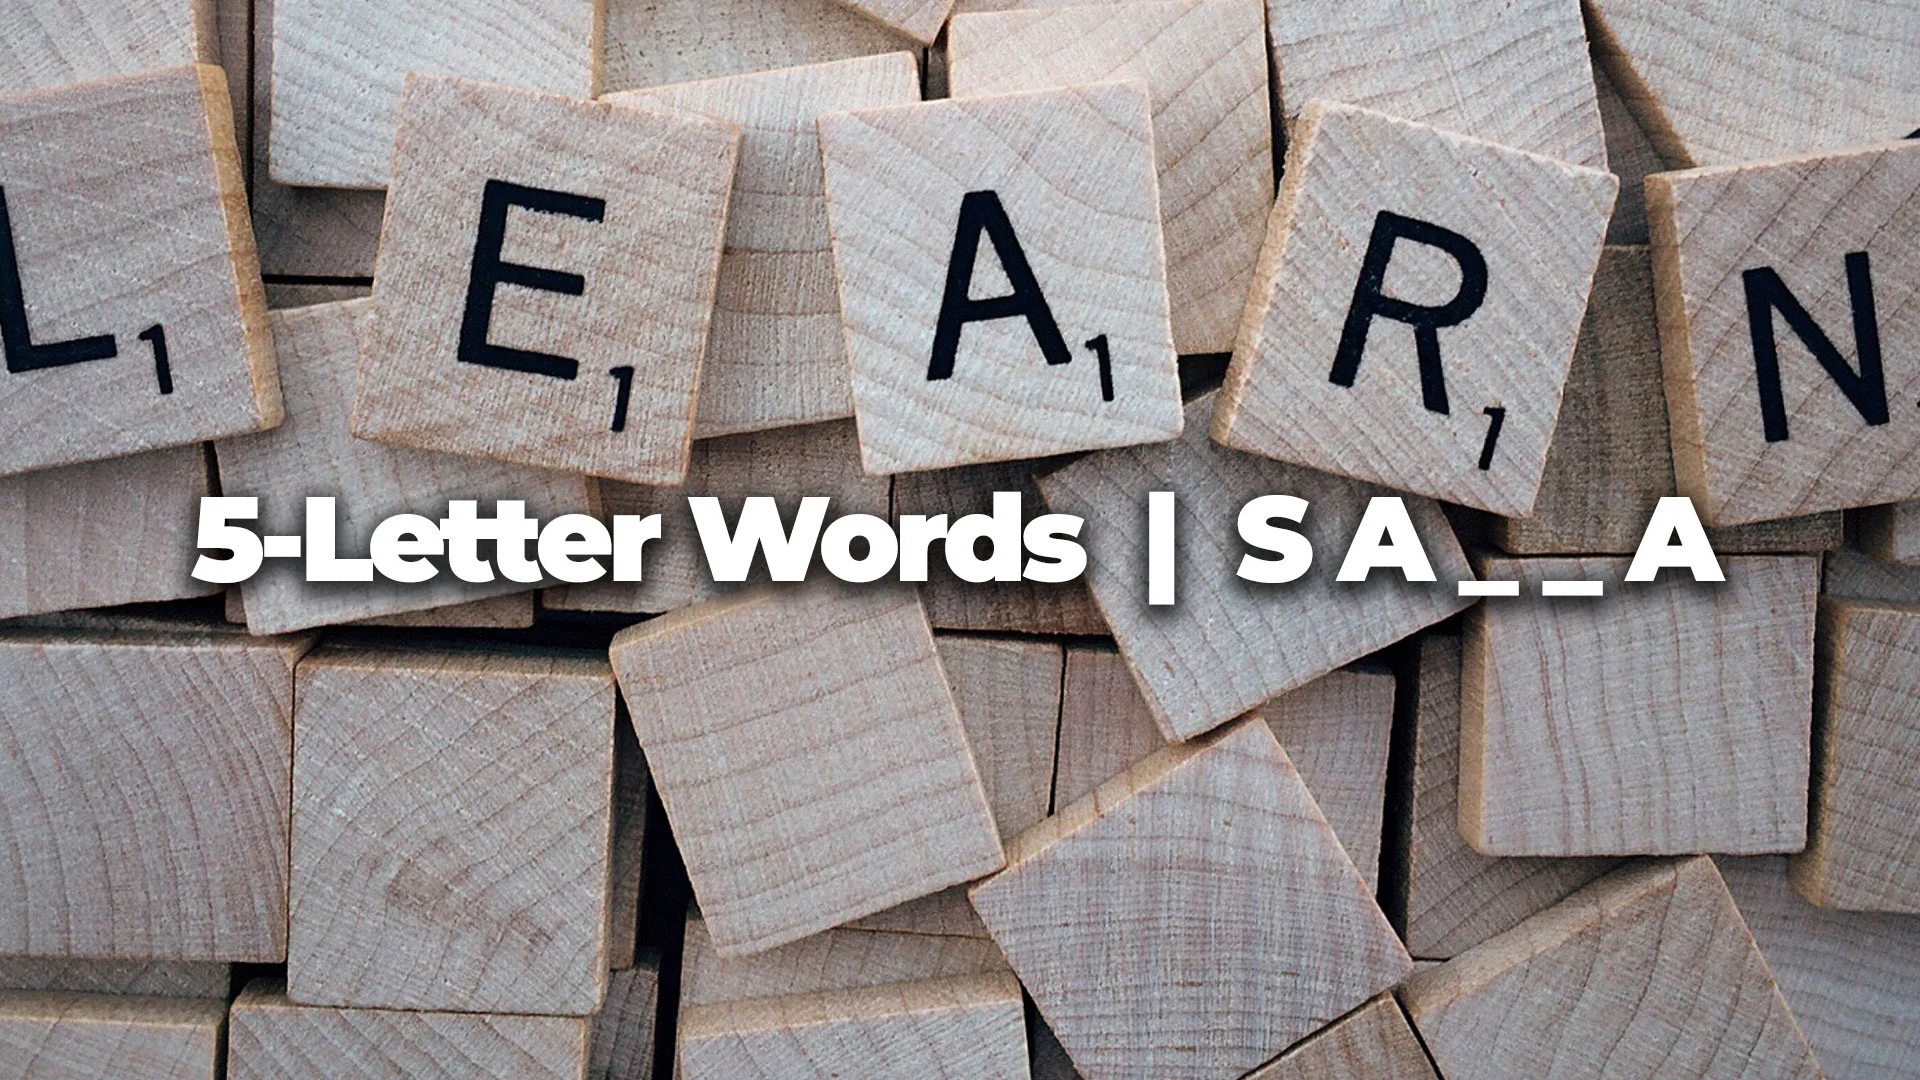 5 Letter Words Starting With SA, Ending In A